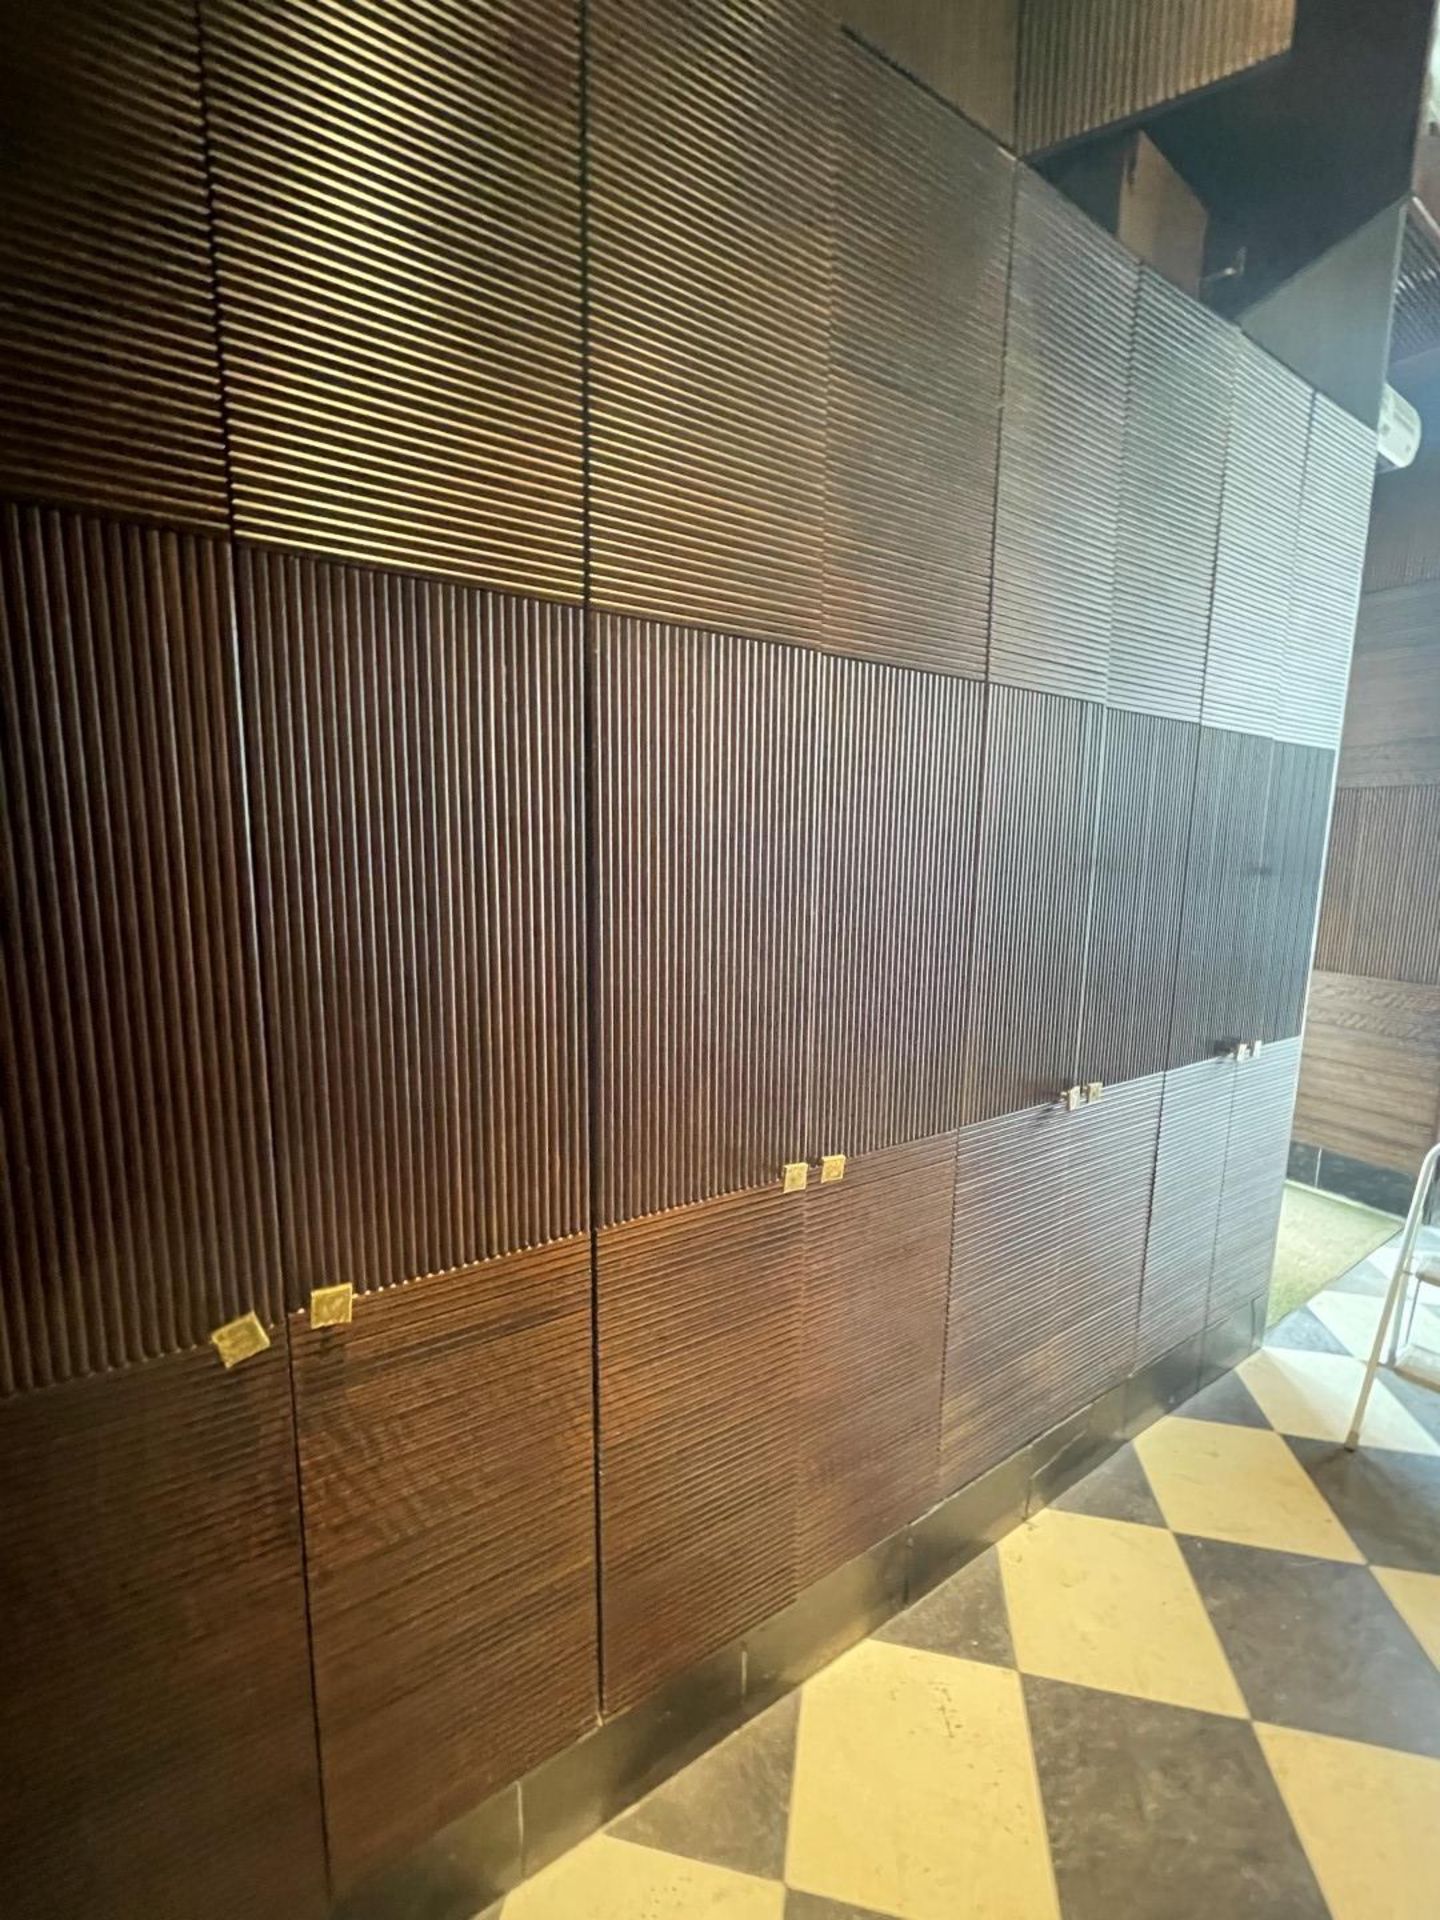 18 x Wooden Ribbed Cabinet Doors In Various Sizes - Ref: BLVD121 - CL649 - Location: London W8 Lot